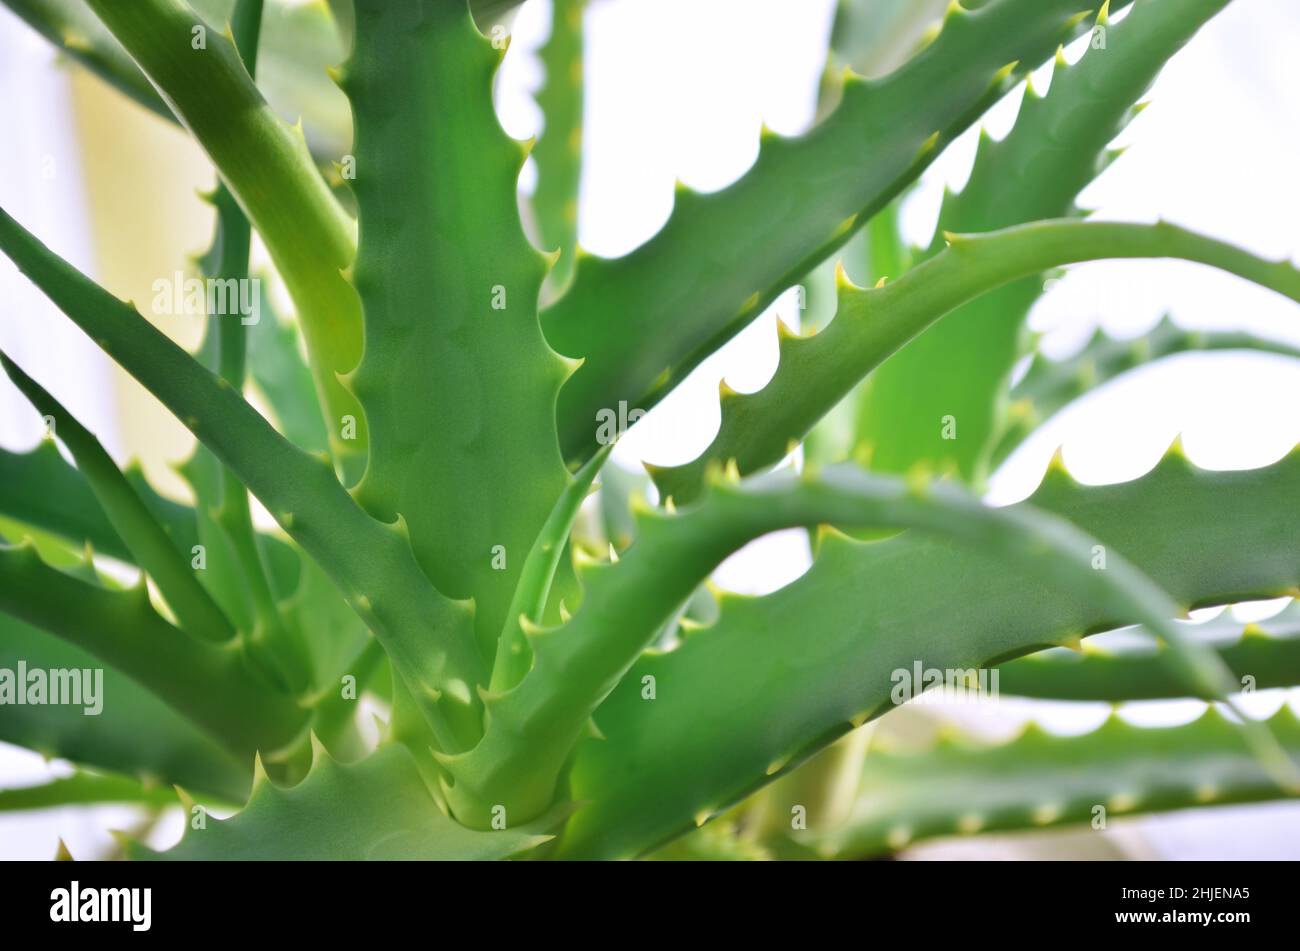 Green leaves with spikes of Aloe arborescens, known as krantz aloe or candelabra aloe. Useful medicinal plant. Stock Photo